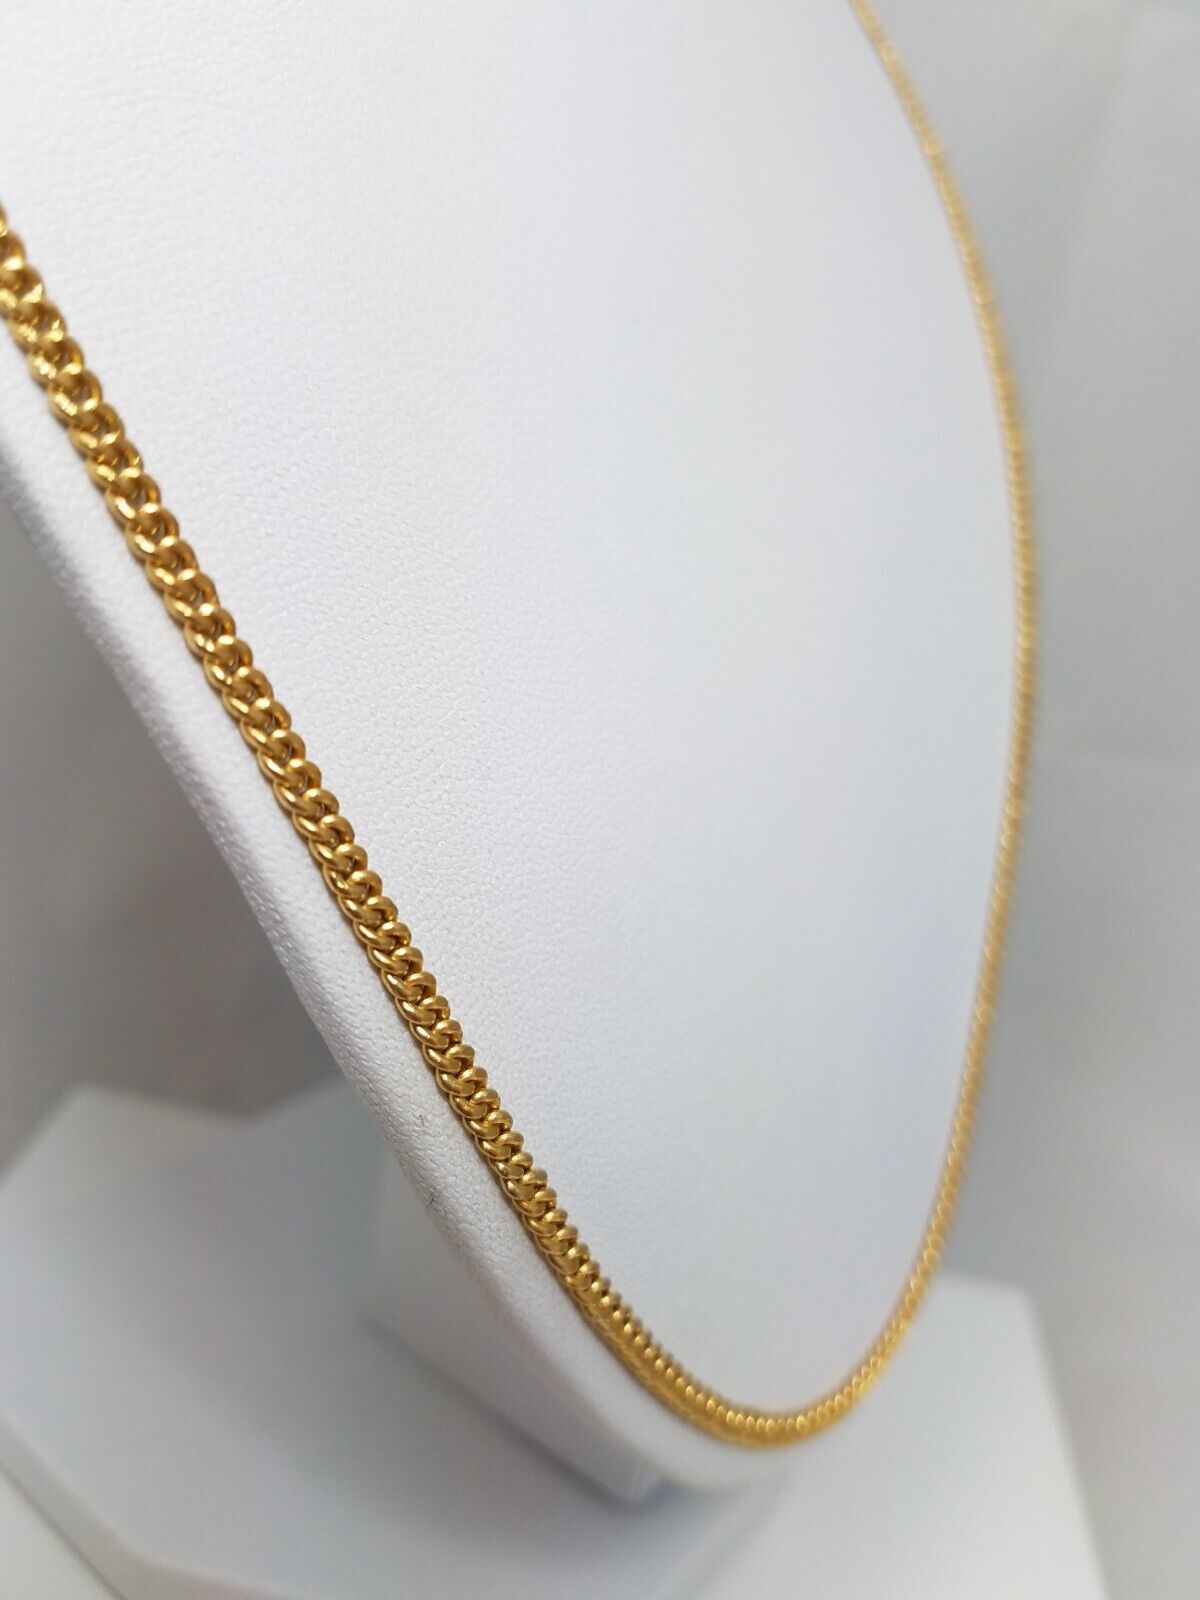 26" 22k Solid Yellow Gold Curb Cuban Link Chain Necklace